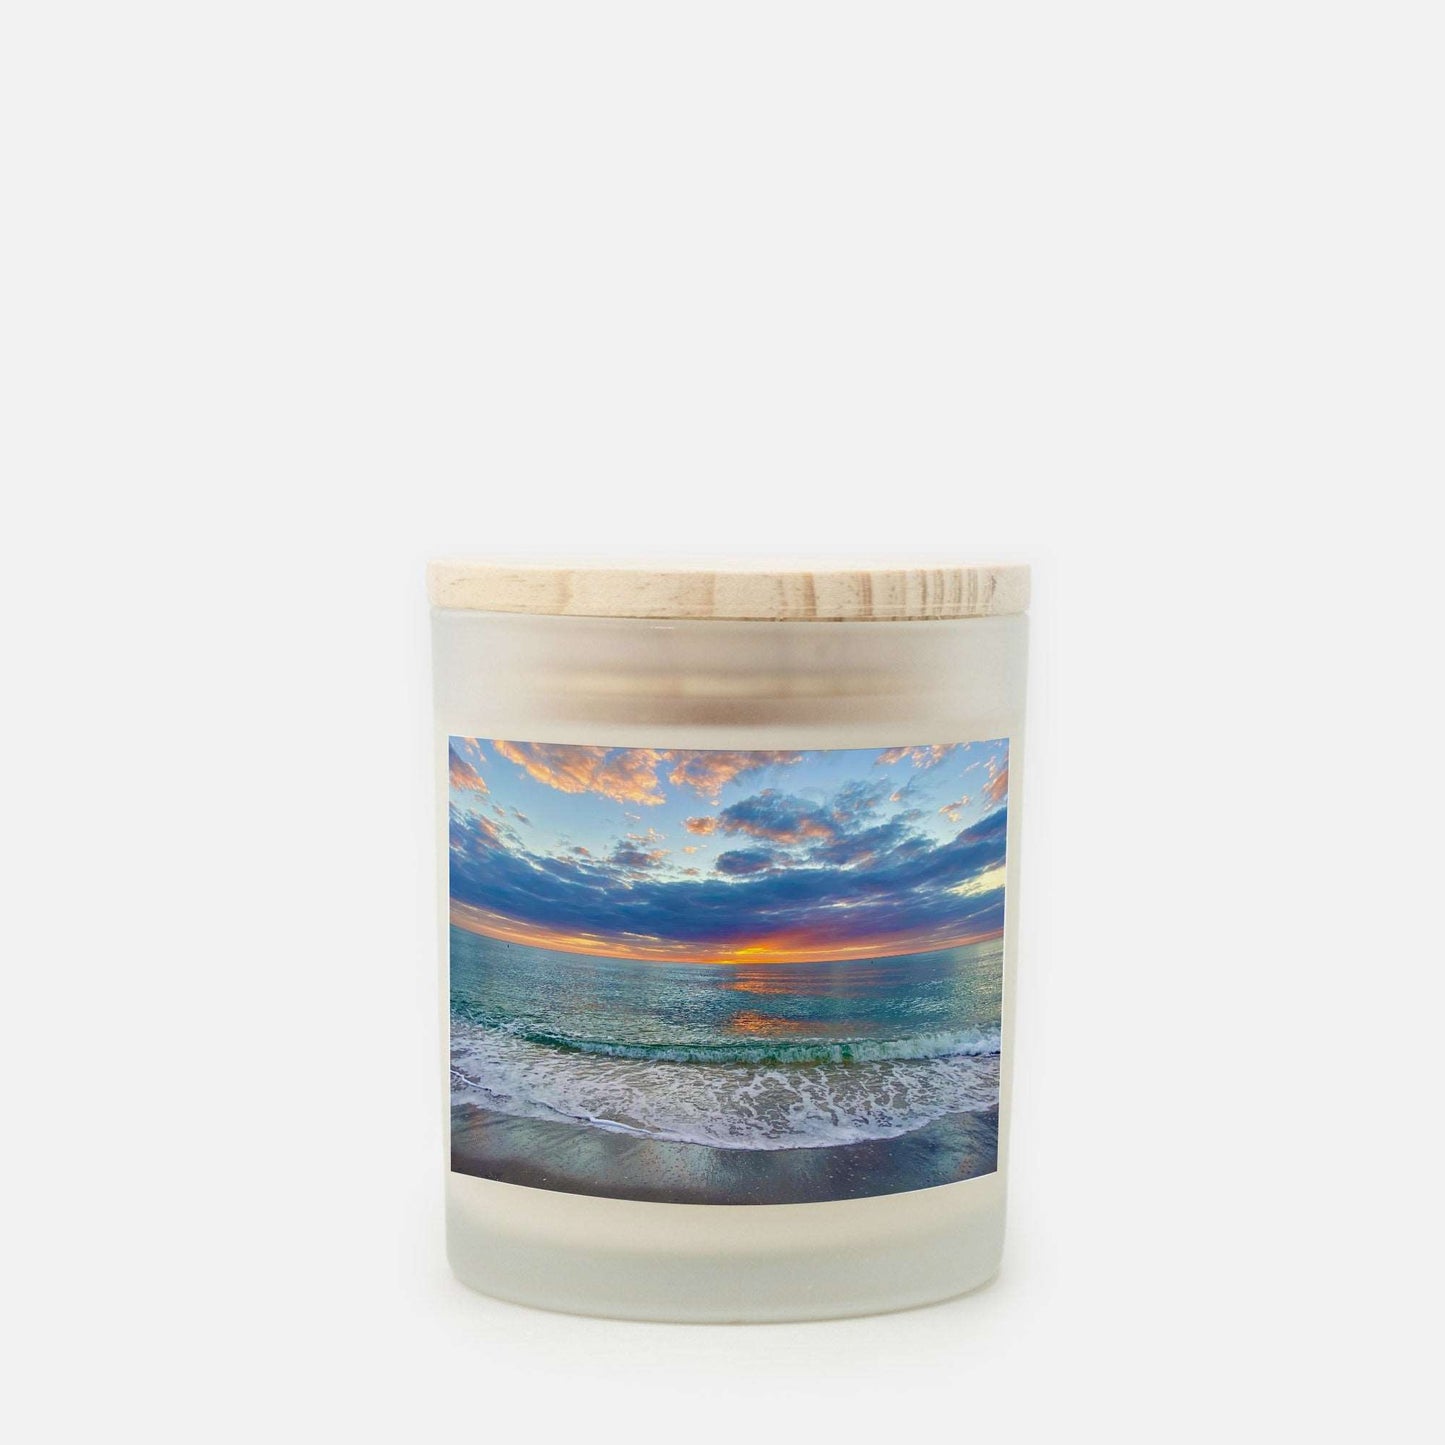 Oh Those Colors! Candle Frosted Glass (Hand Poured 11 oz)